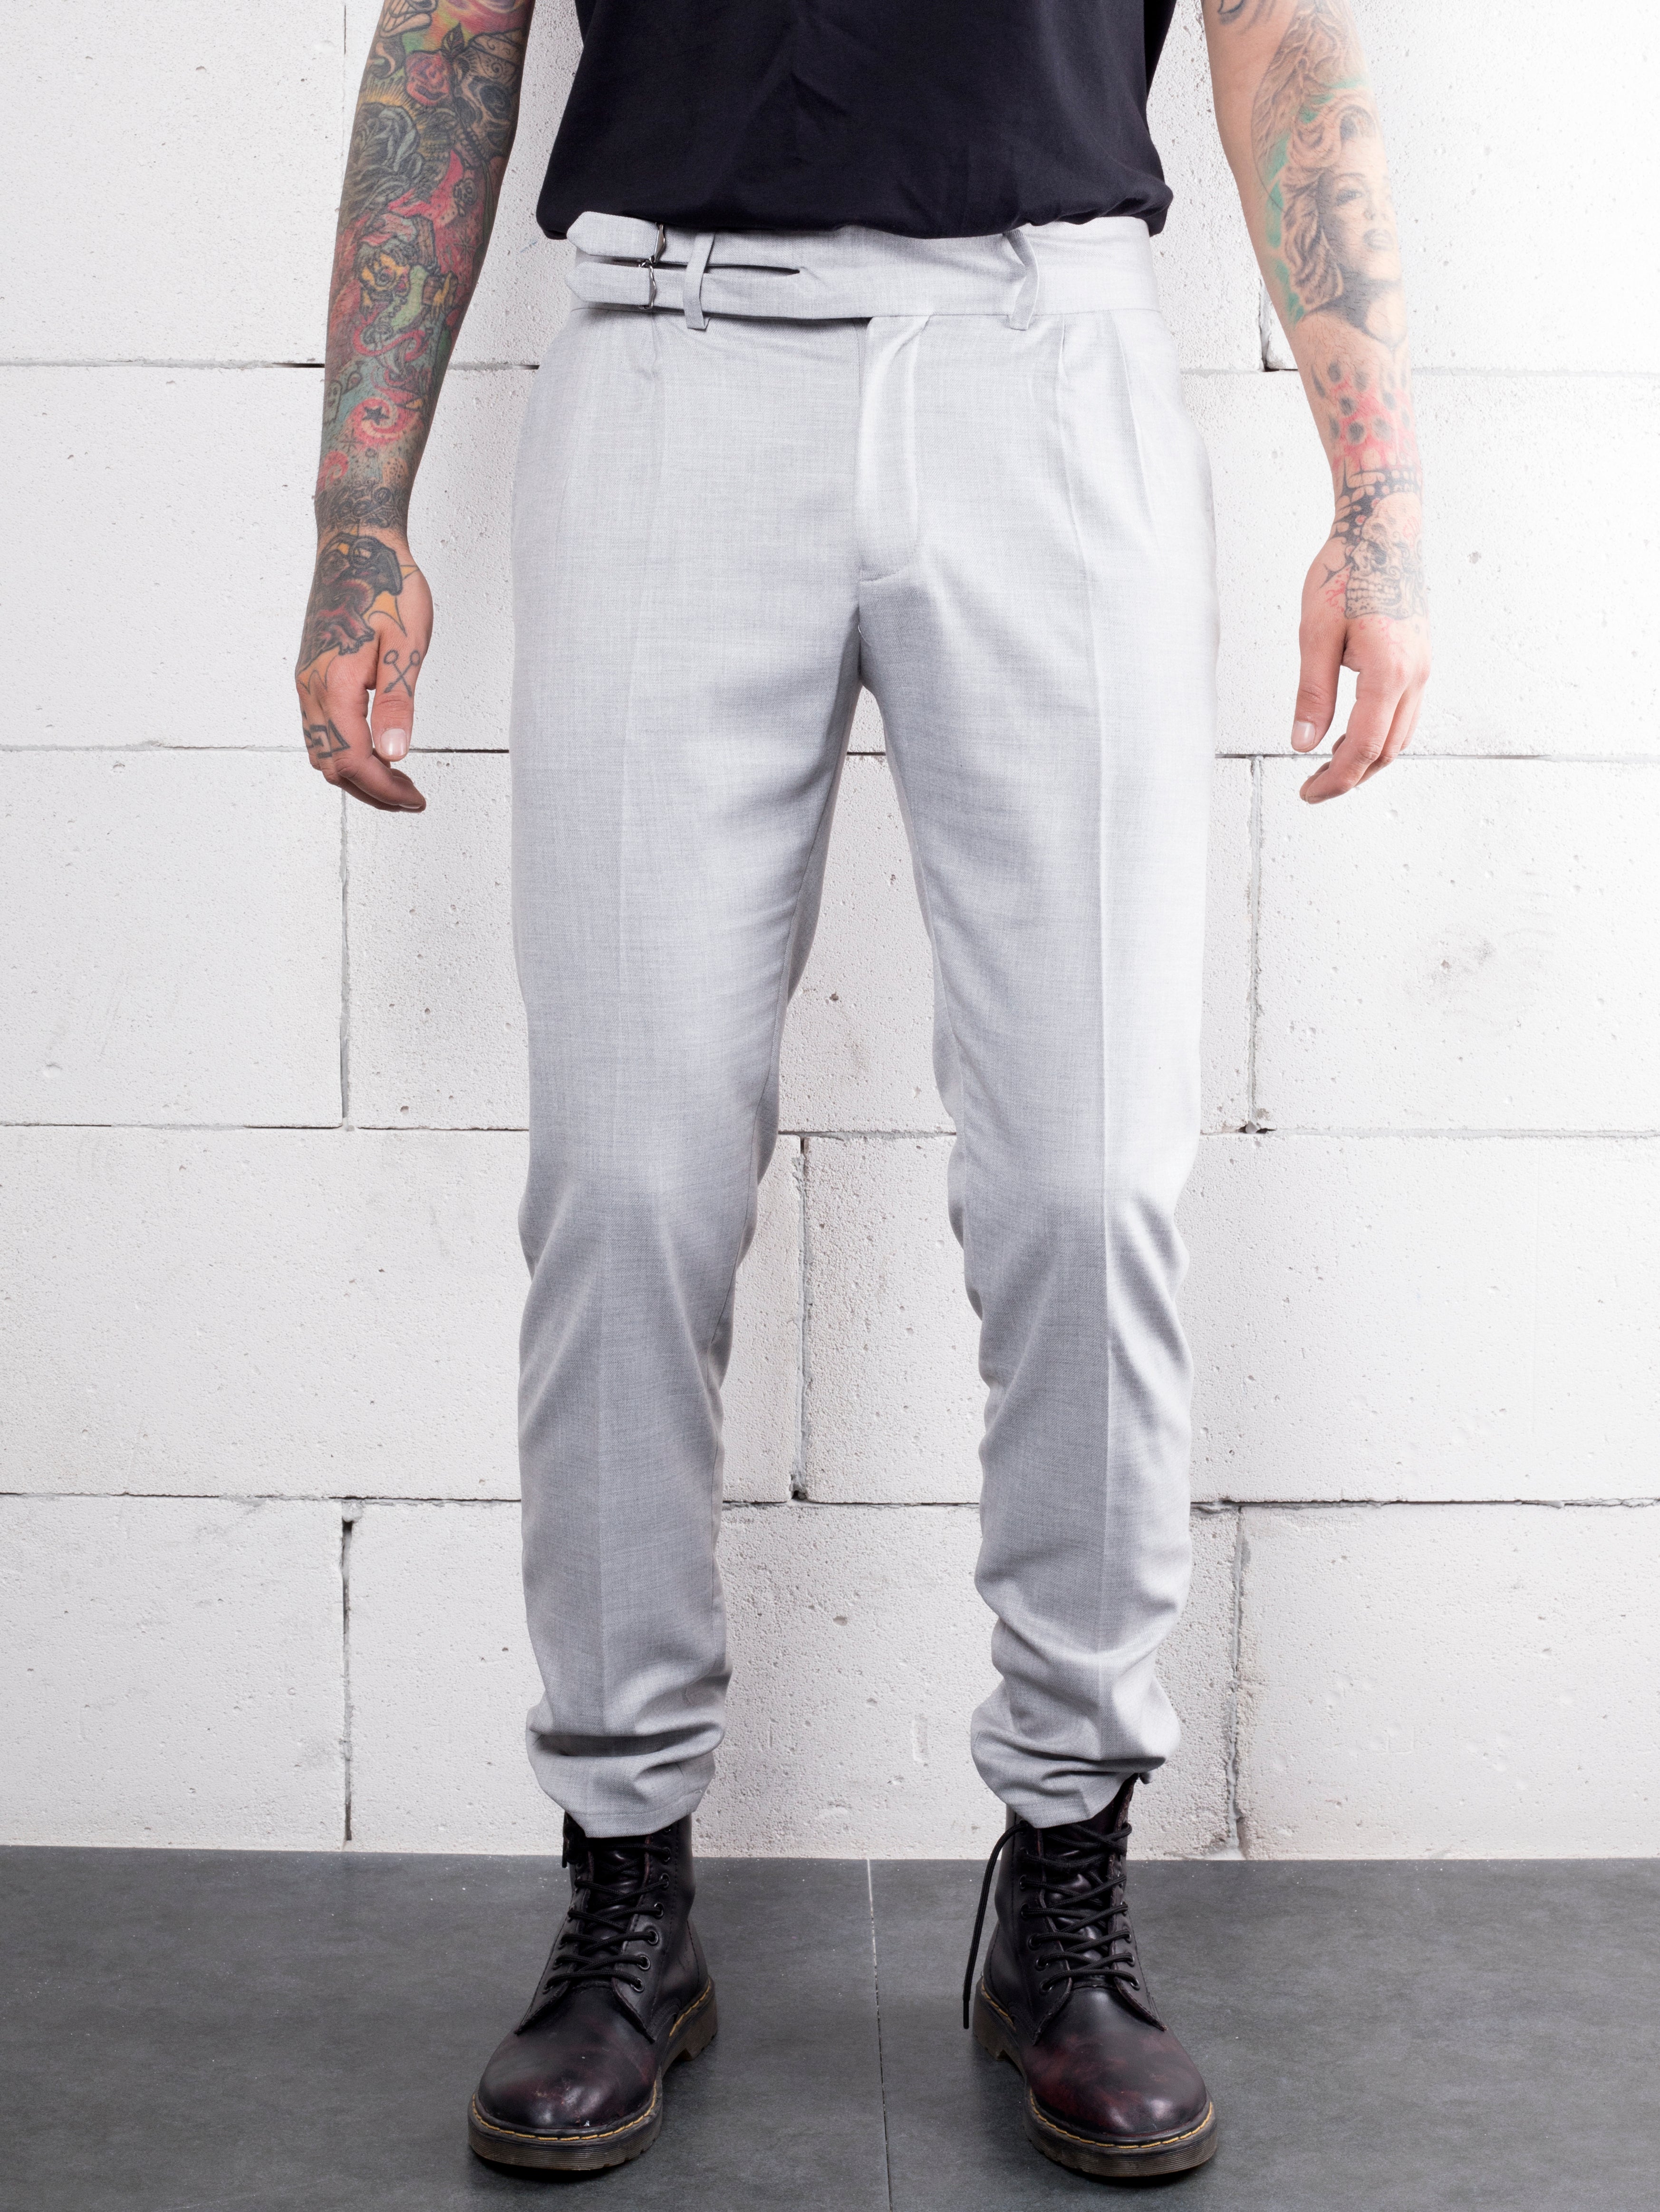 A man with tattoos is standing in front of a white wall wearing GRANITE PANTS made from premium Italian fabric.